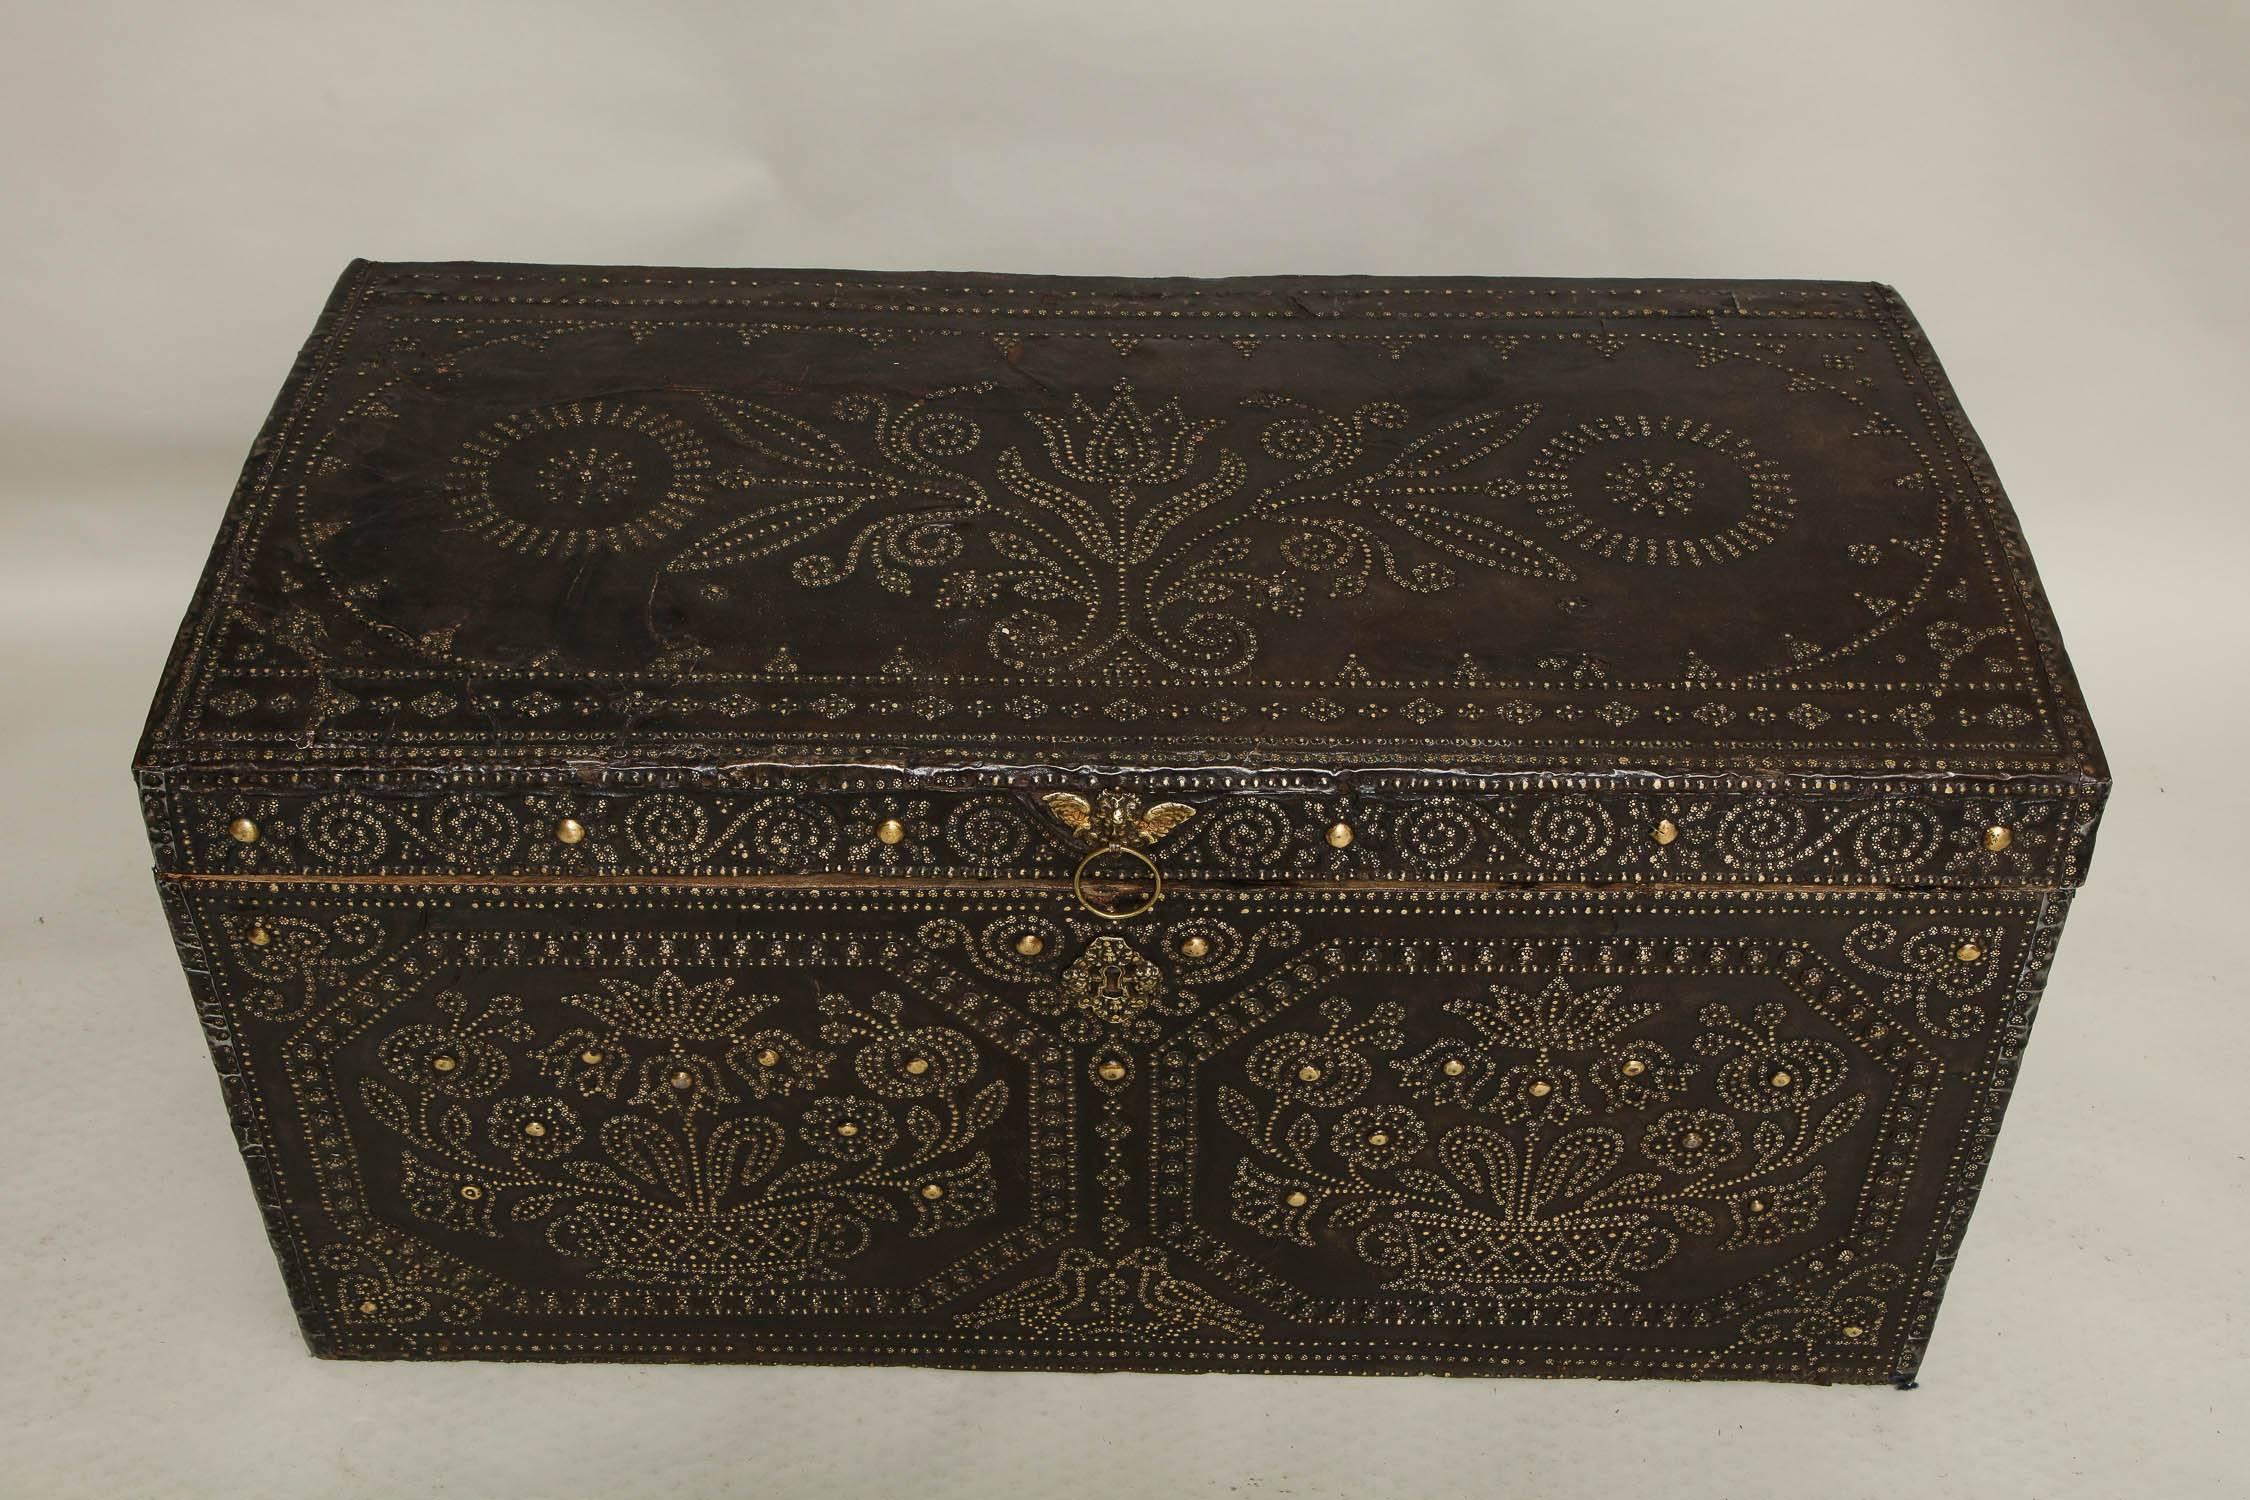 Early 18th Century Profusely Studded Royal Leather Trunk